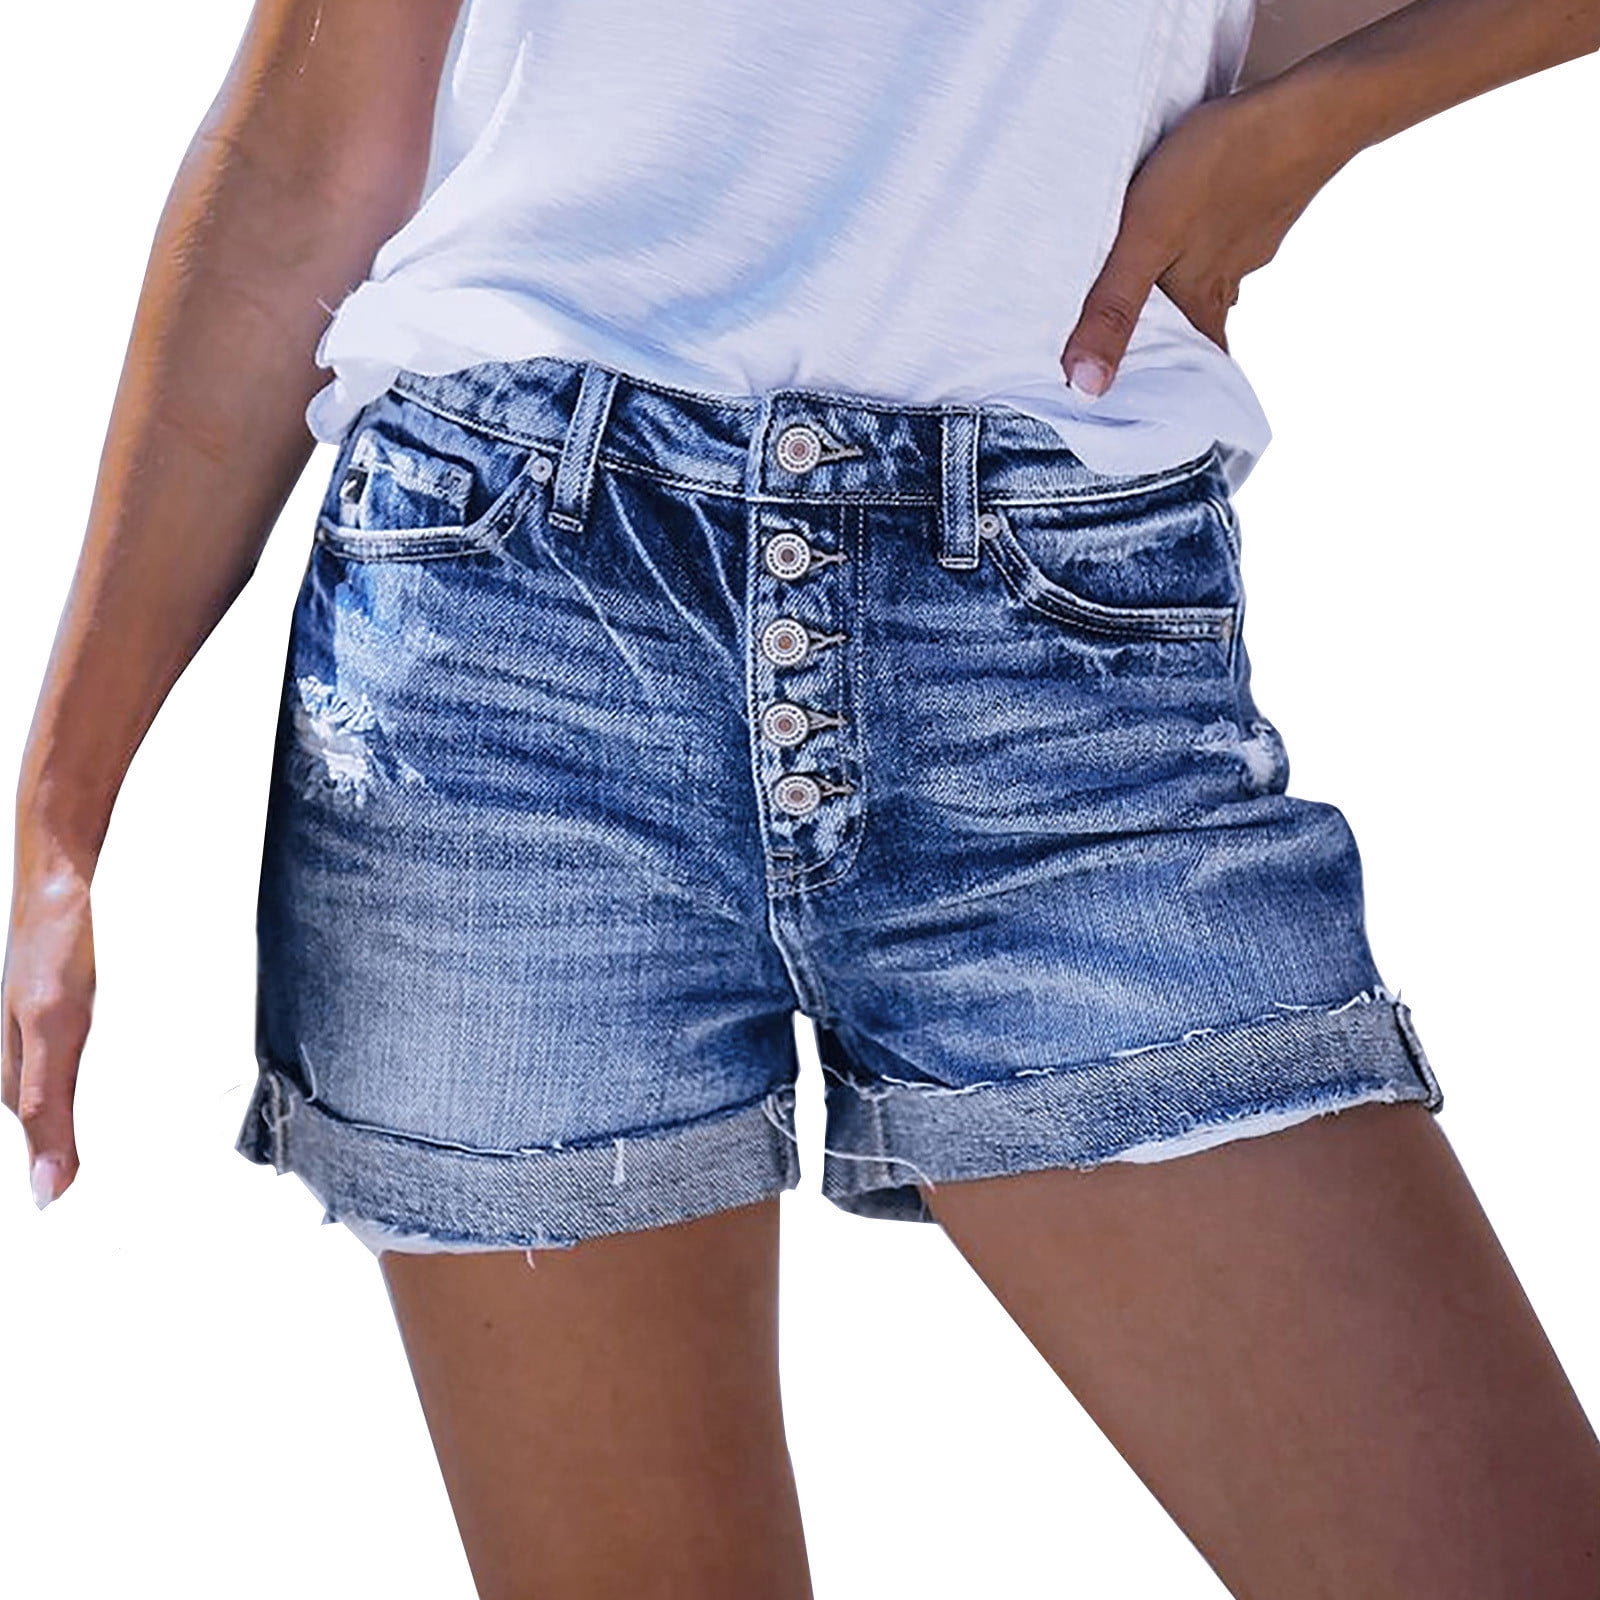 JSPOYOU Womens Shorts Hole Denim Shorts Low Waisted Washed Ripped Mini Jeans Pants